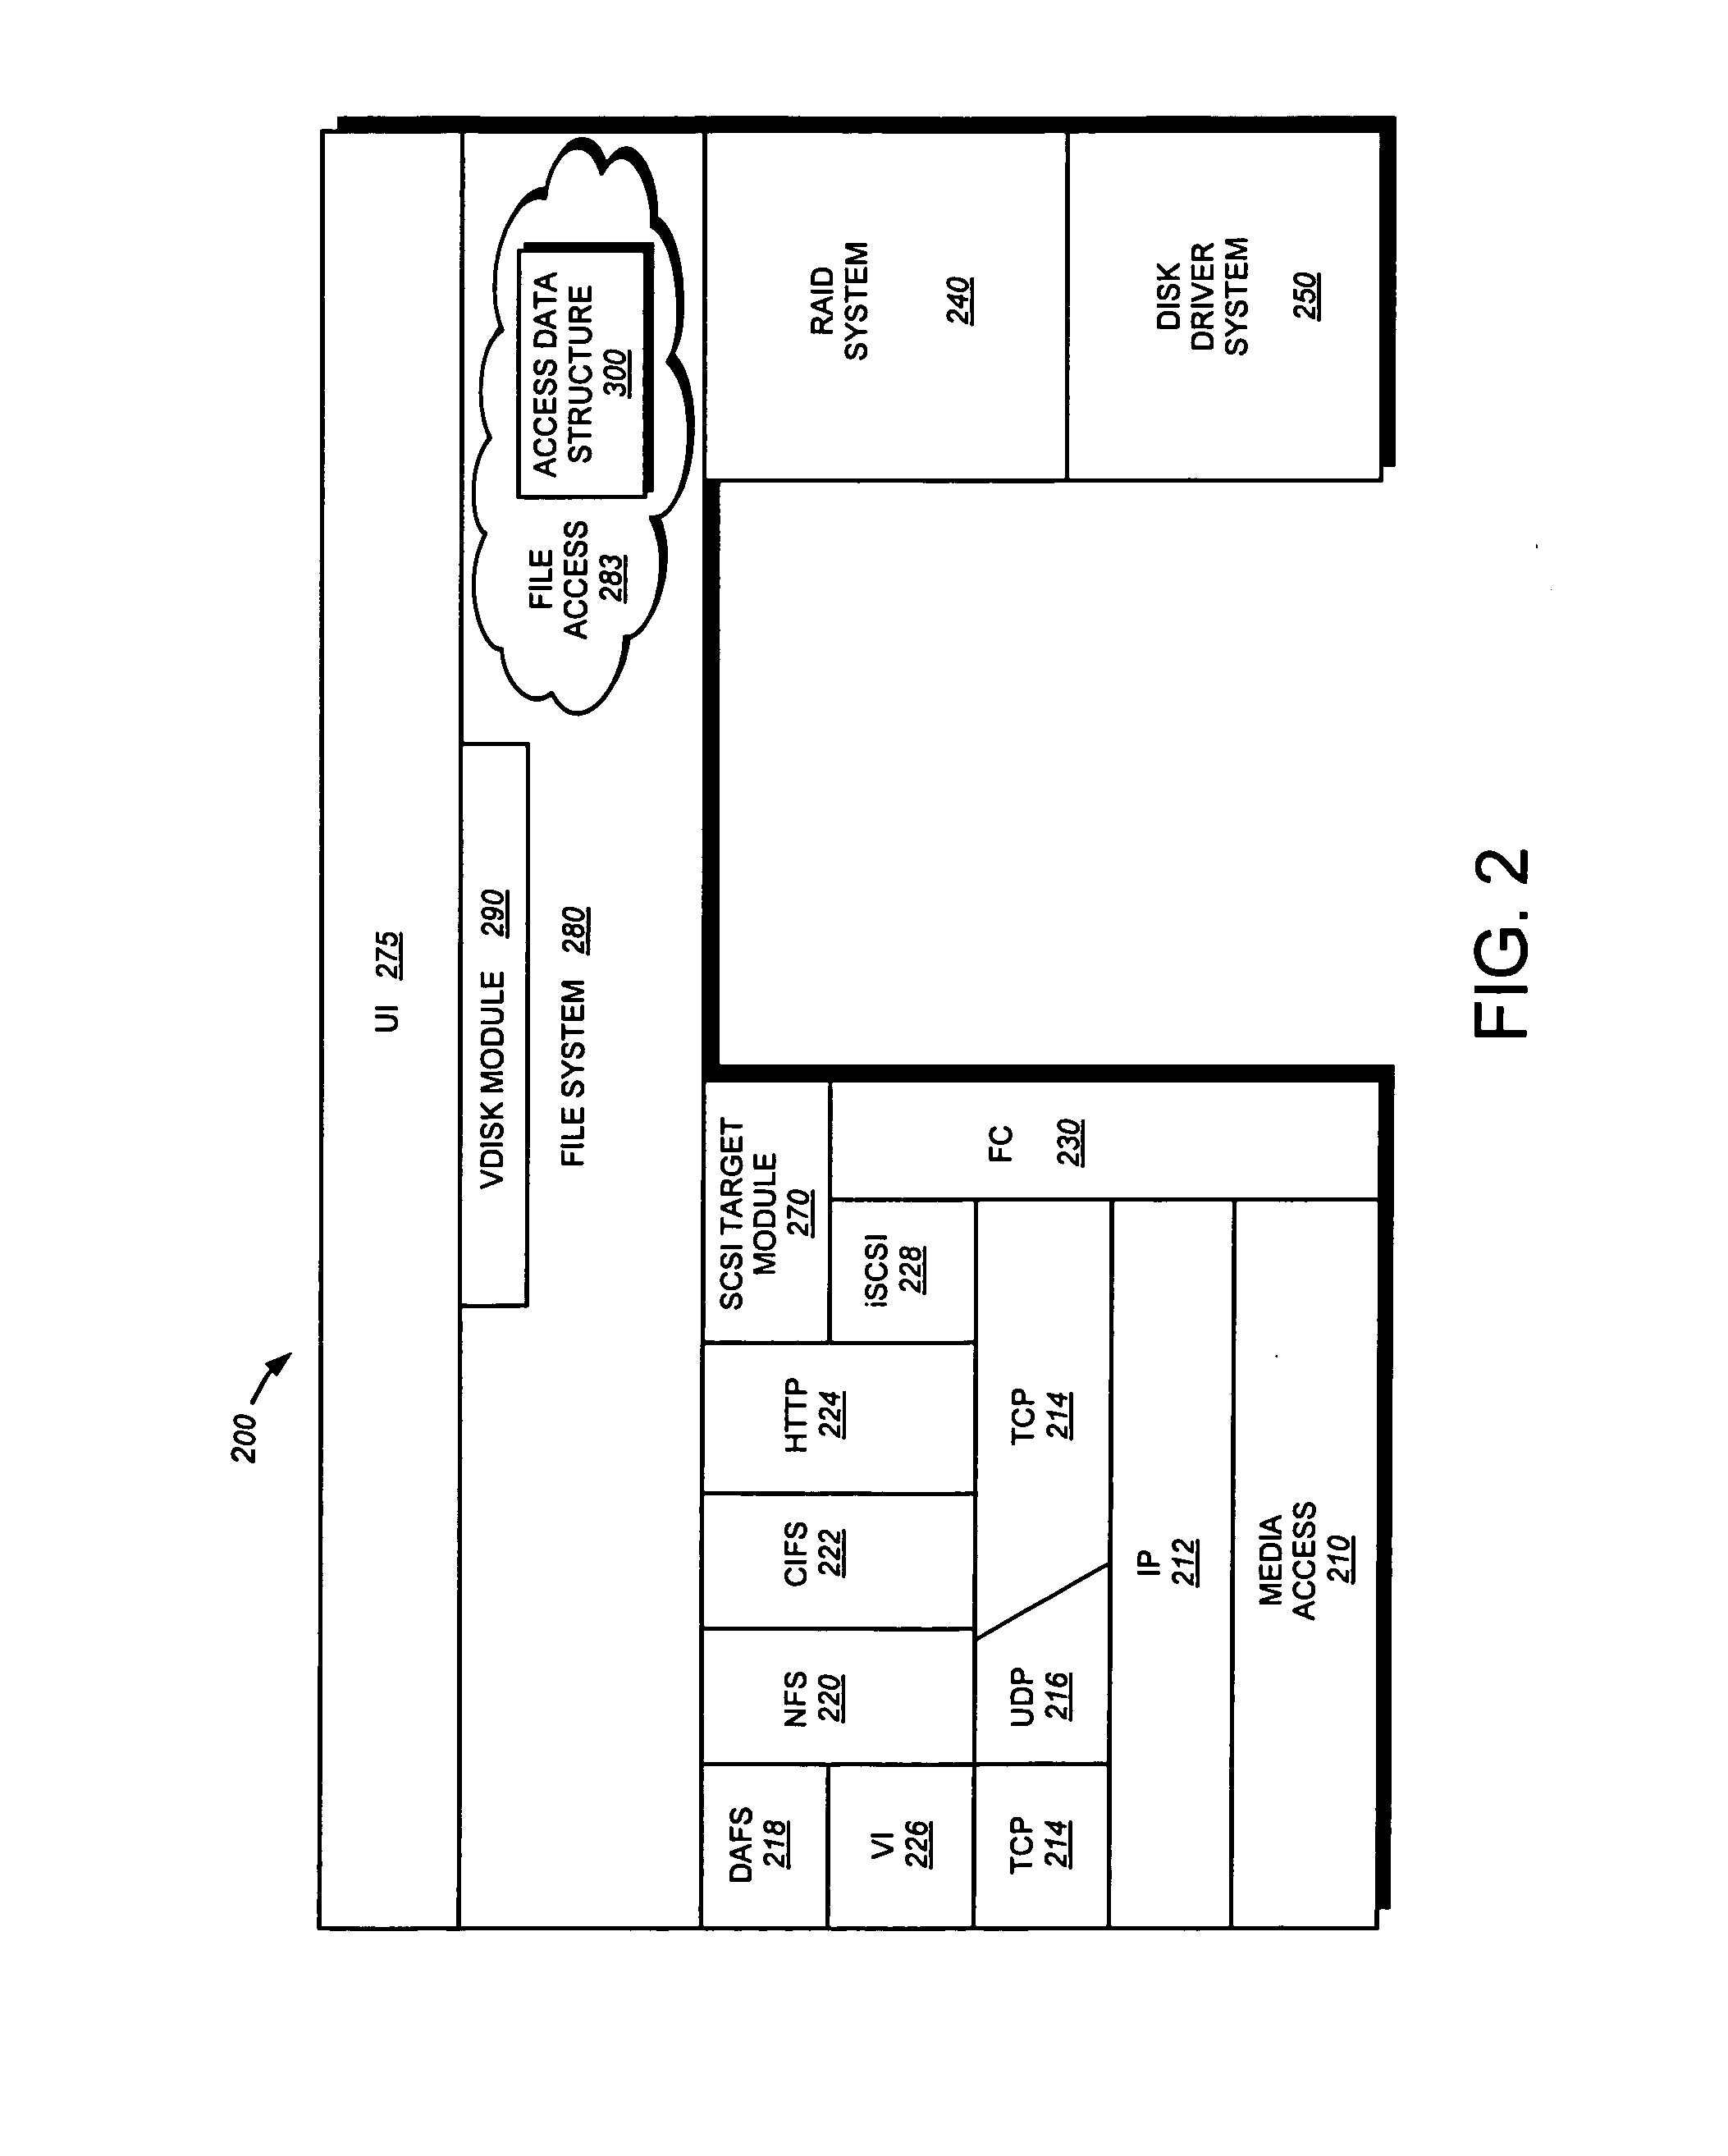 System and method for improving the relevance of search results using data container access patterns